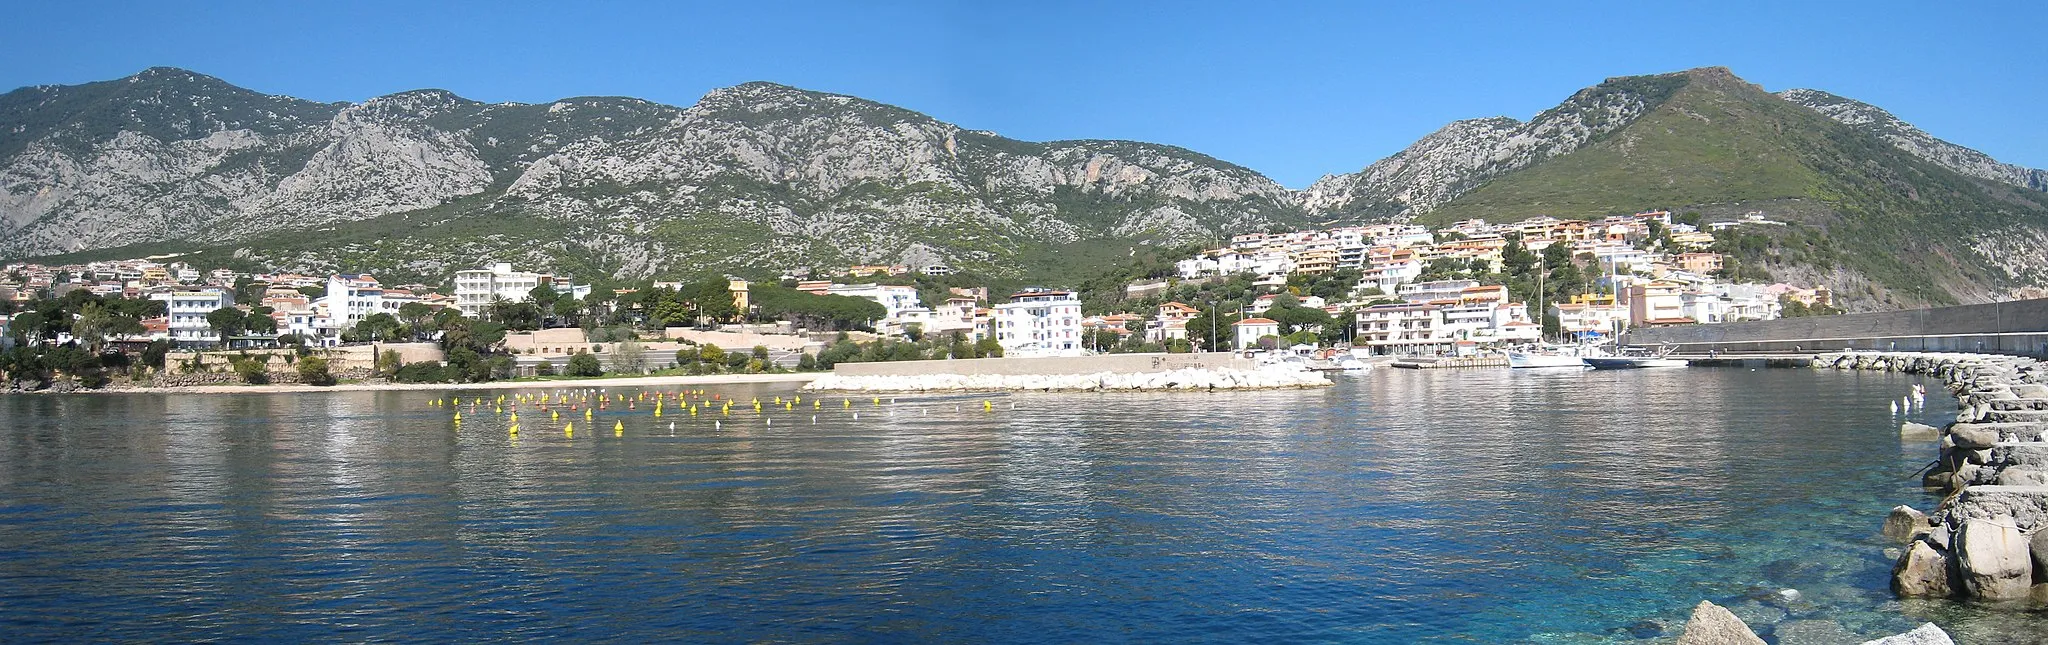 Photo showing: The town of Cala Gonone, seen from the pier.
Composed of two shots stitched together.